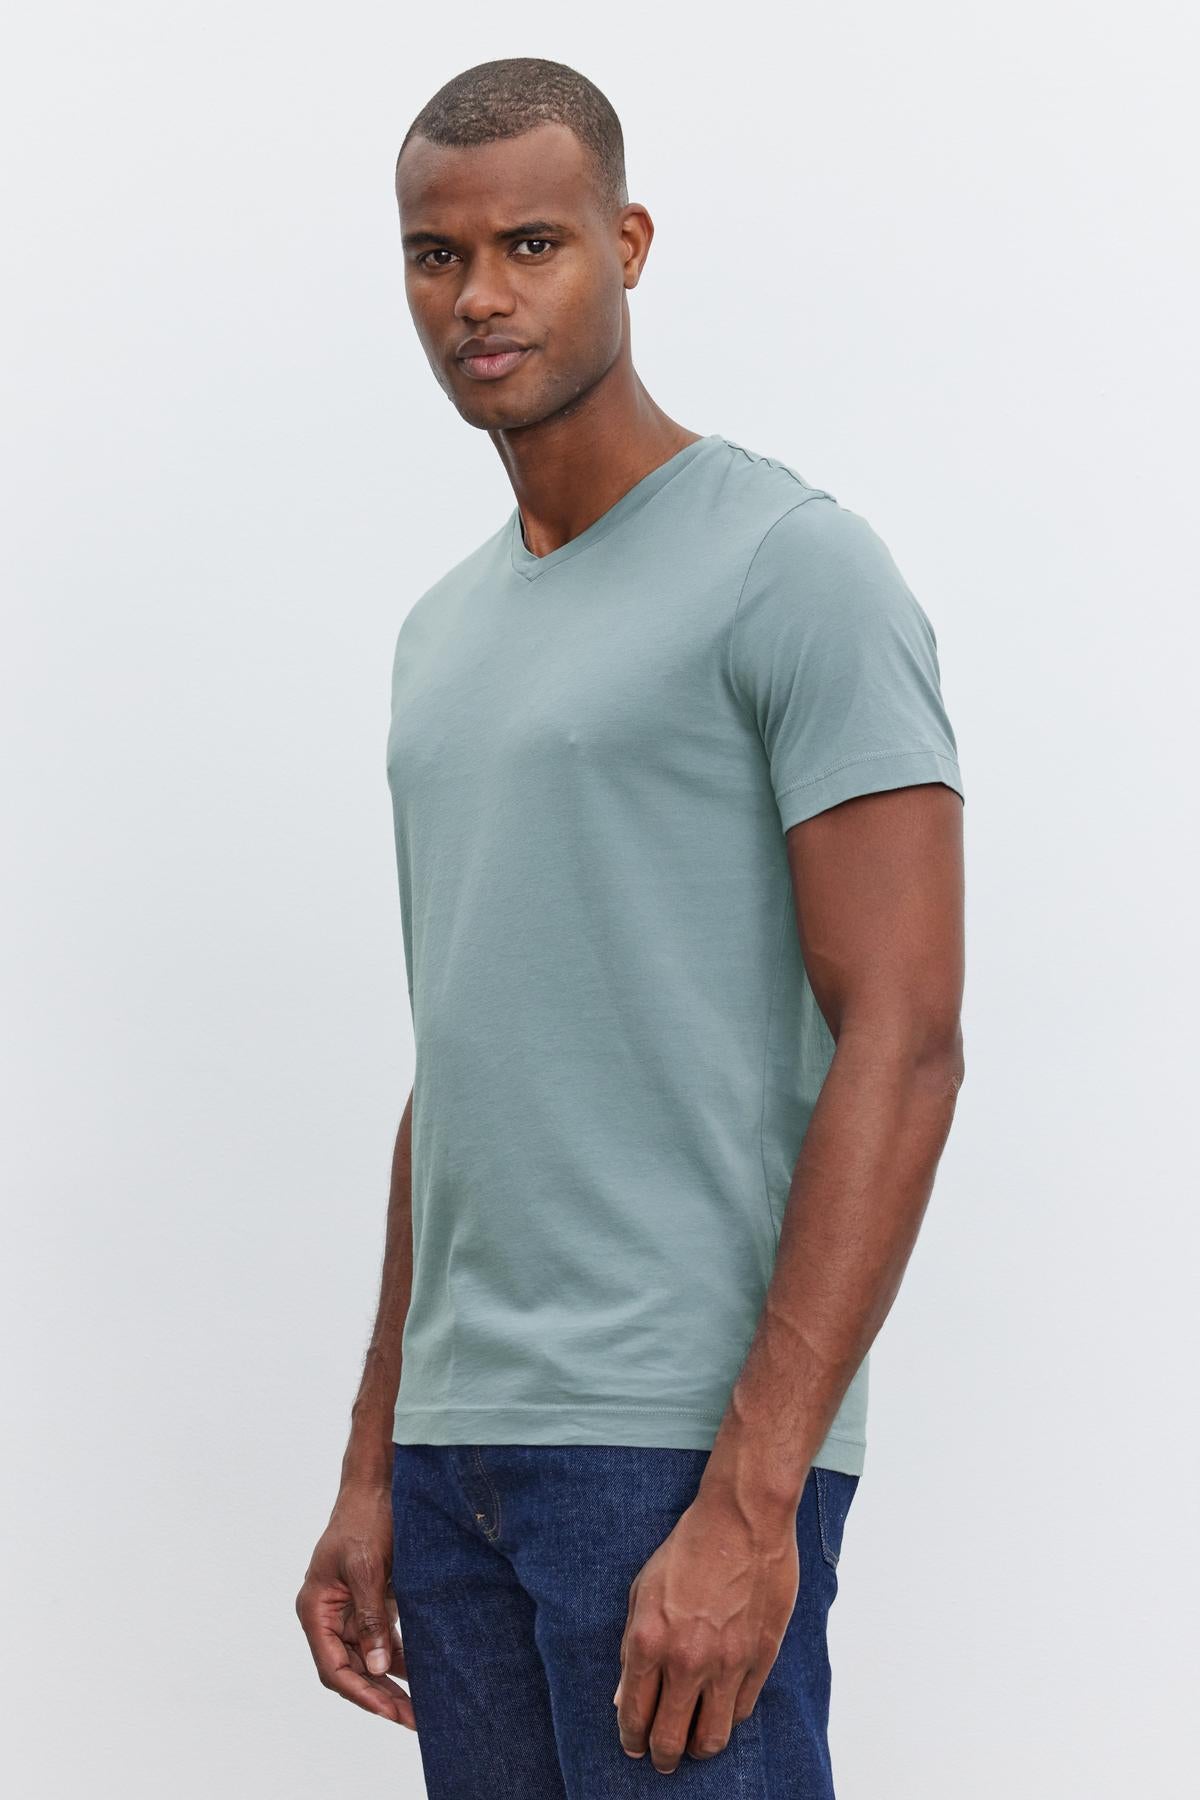 A person with short hair, wearing a light green SAMSEN TEE from Velvet by Graham & Spencer with a v-neckline and blue jeans, stands against a plain white background—a perfect example of everyday wear.-37409982611649